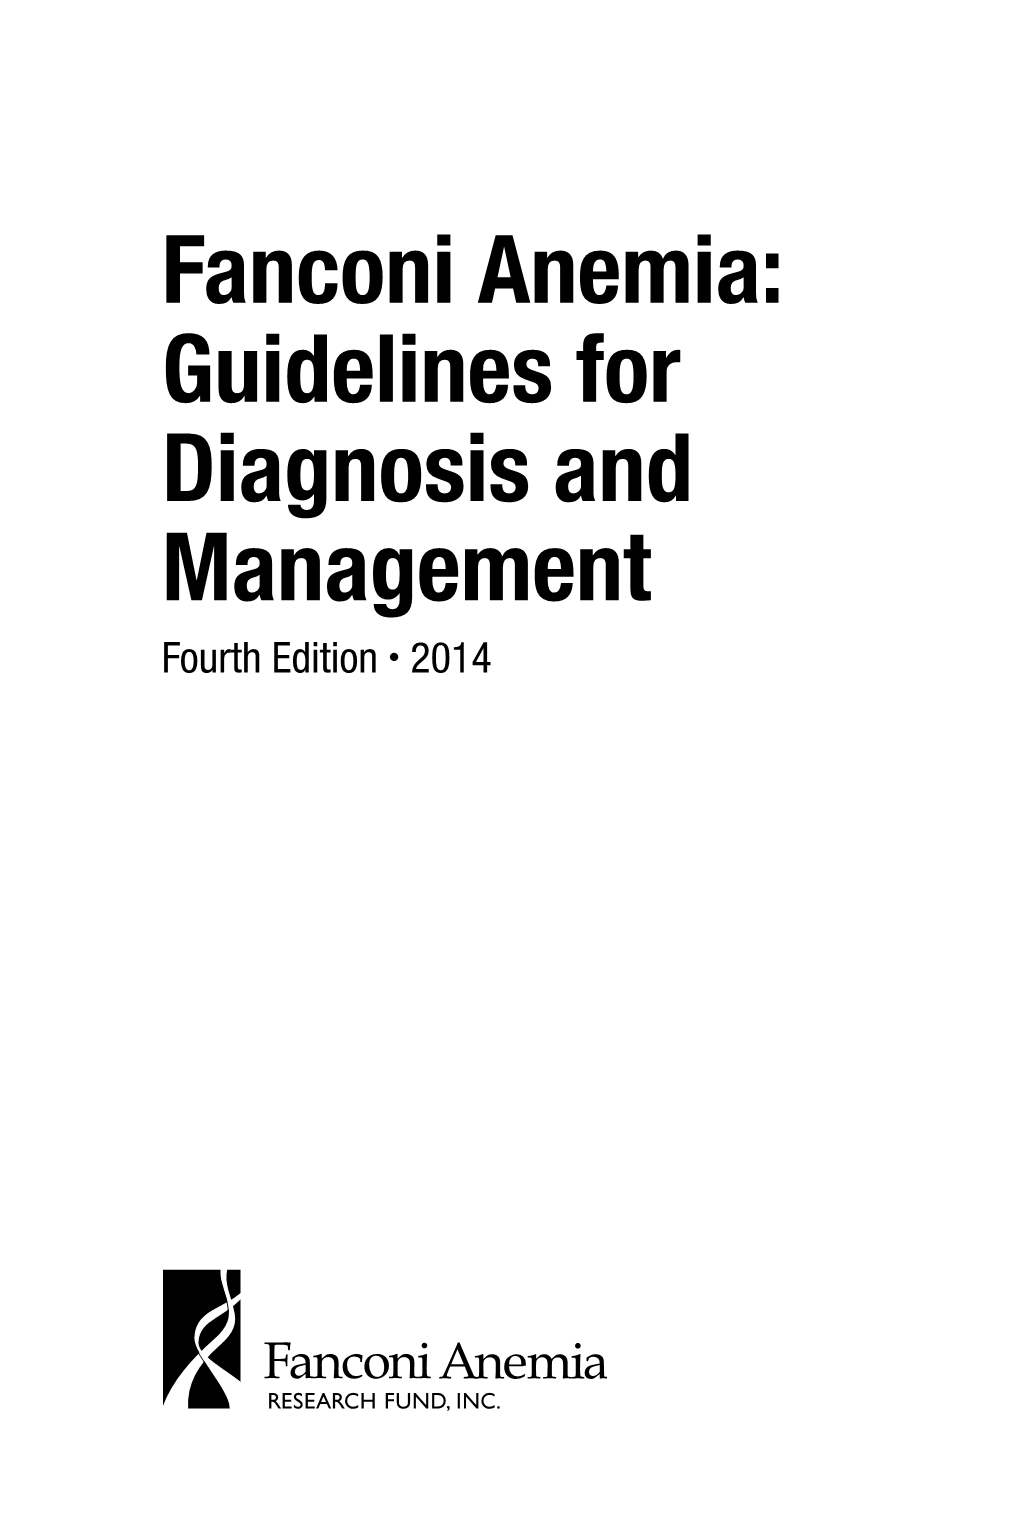 Guidelines for Diagnosis and Management, Fourth Edition